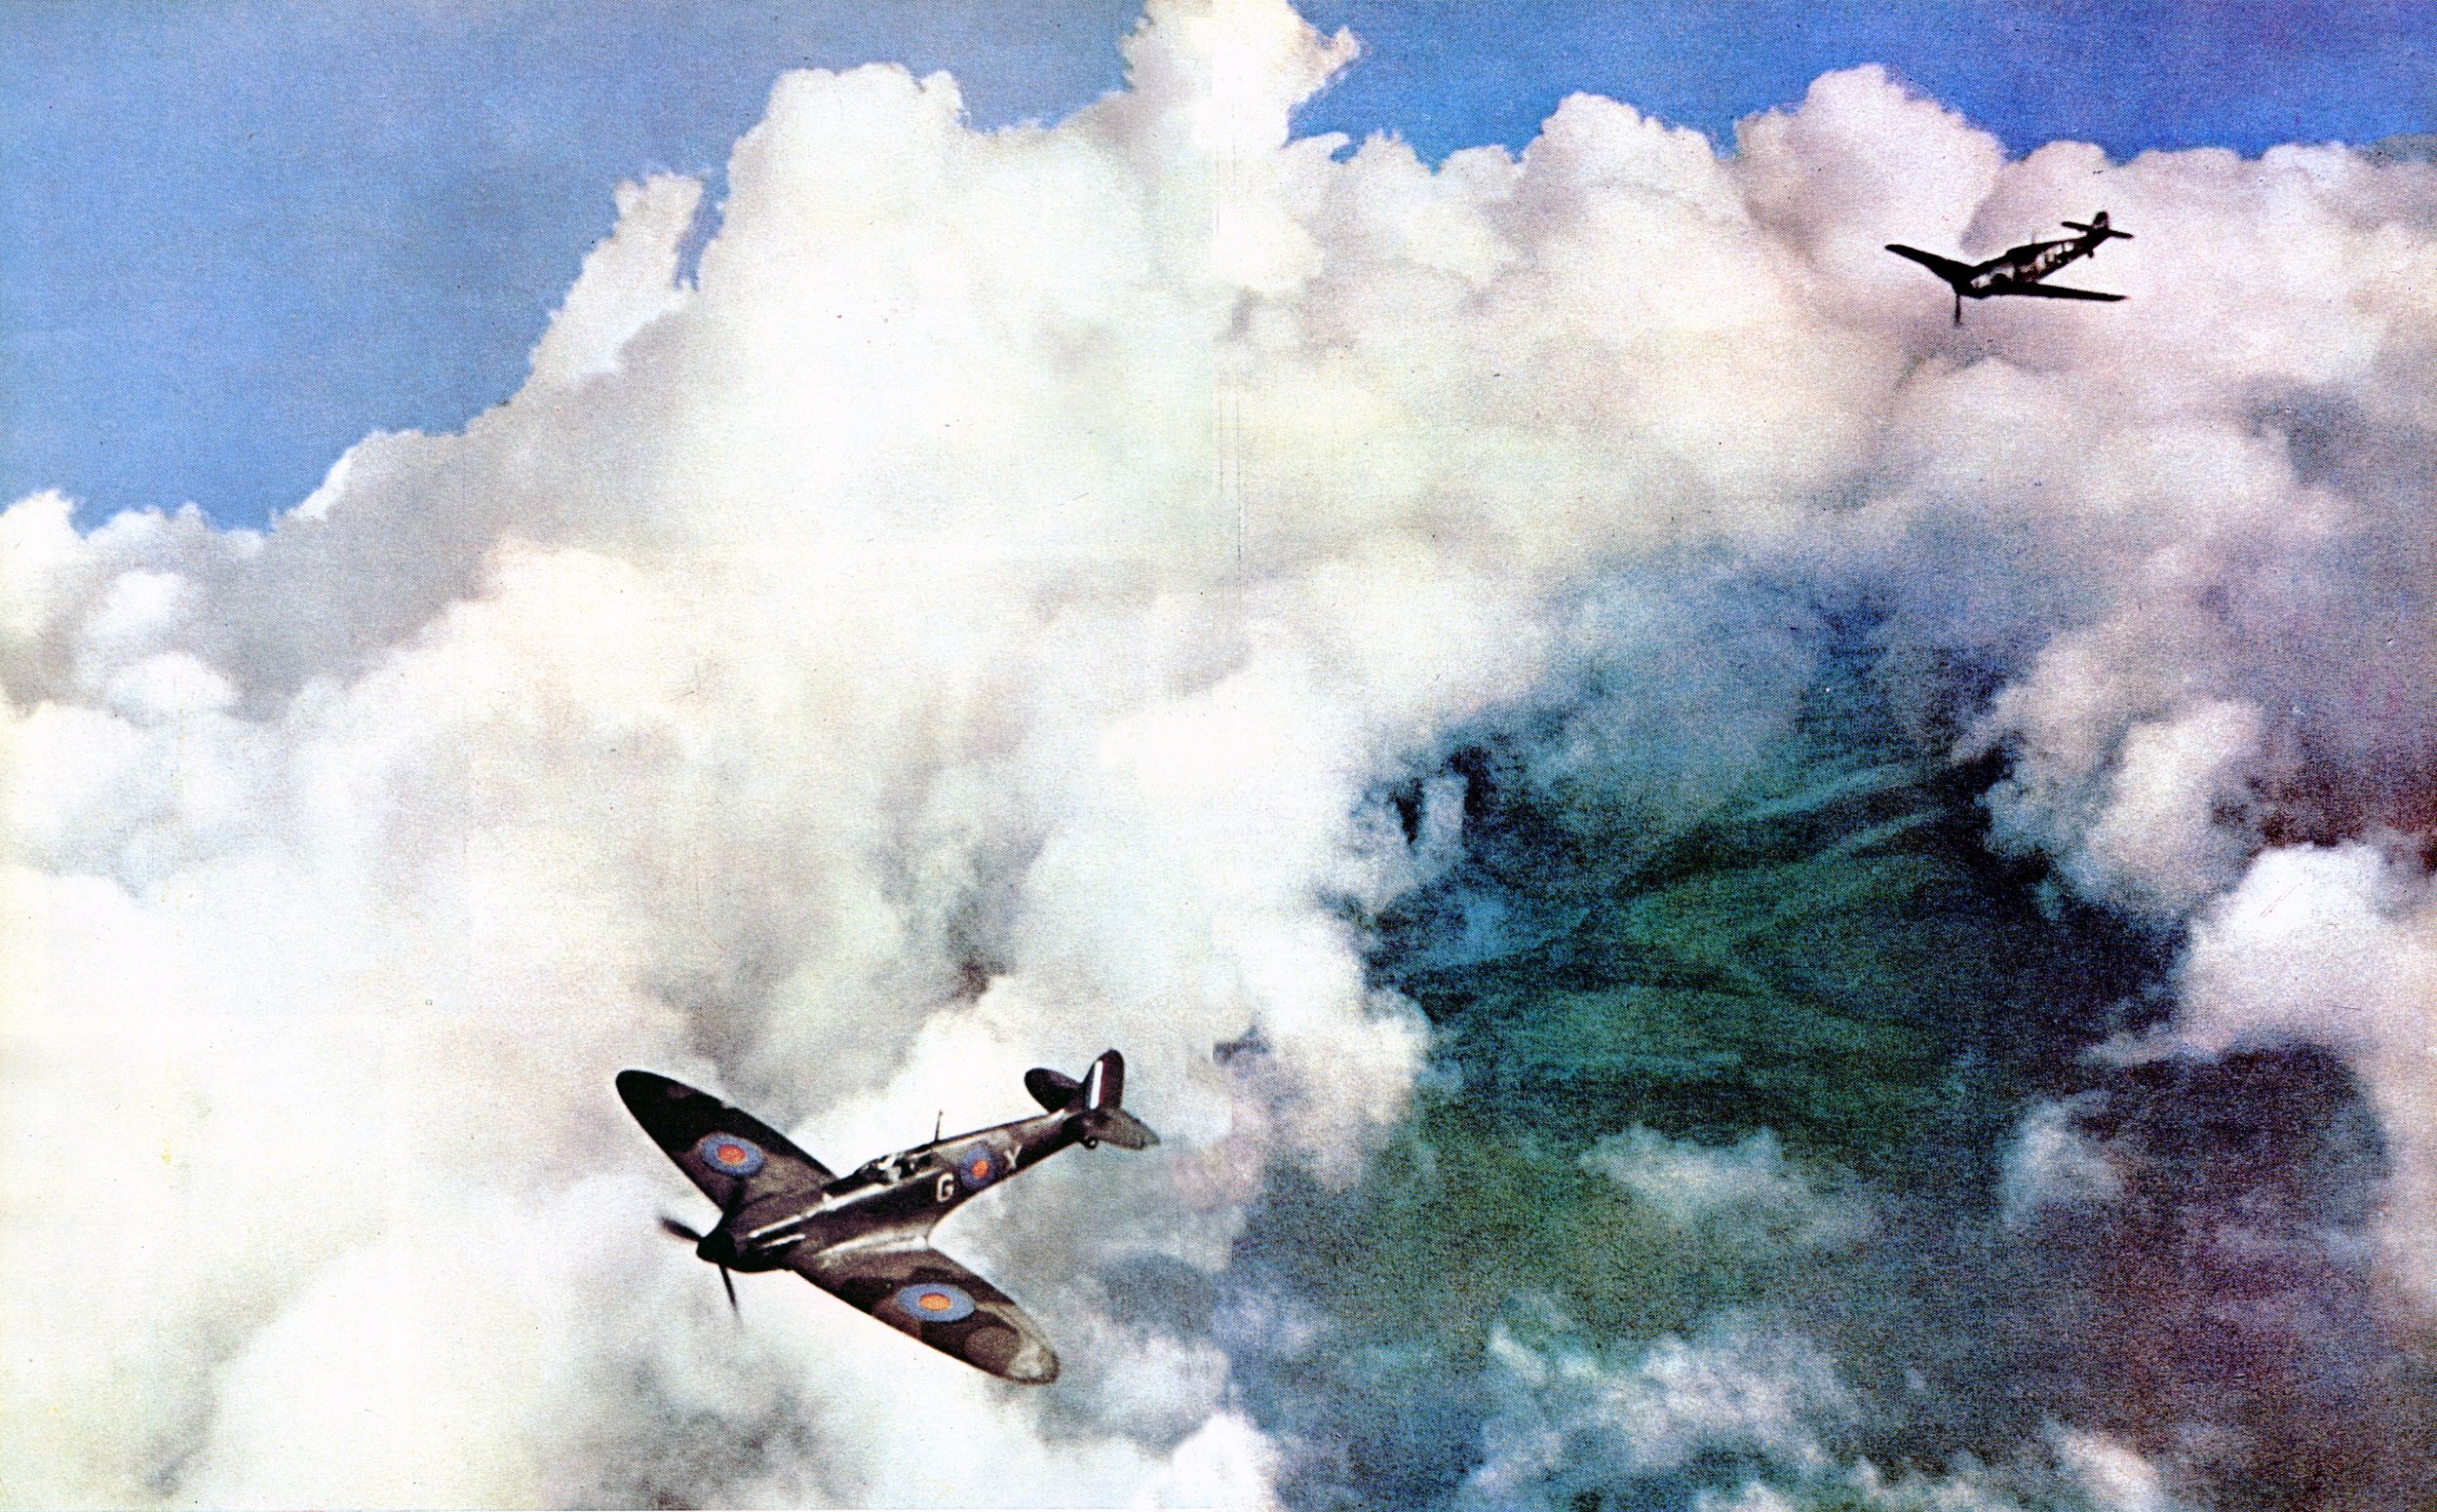 A Spitfire pilot dives to avoid machine-gun fire from an attacking German Messerschmitt Me-109.  The two aircraft engaged in ferocious dogfights during the Battle of Britain, which put an end to German plans for a cross-Channel invasion. ((Signal)